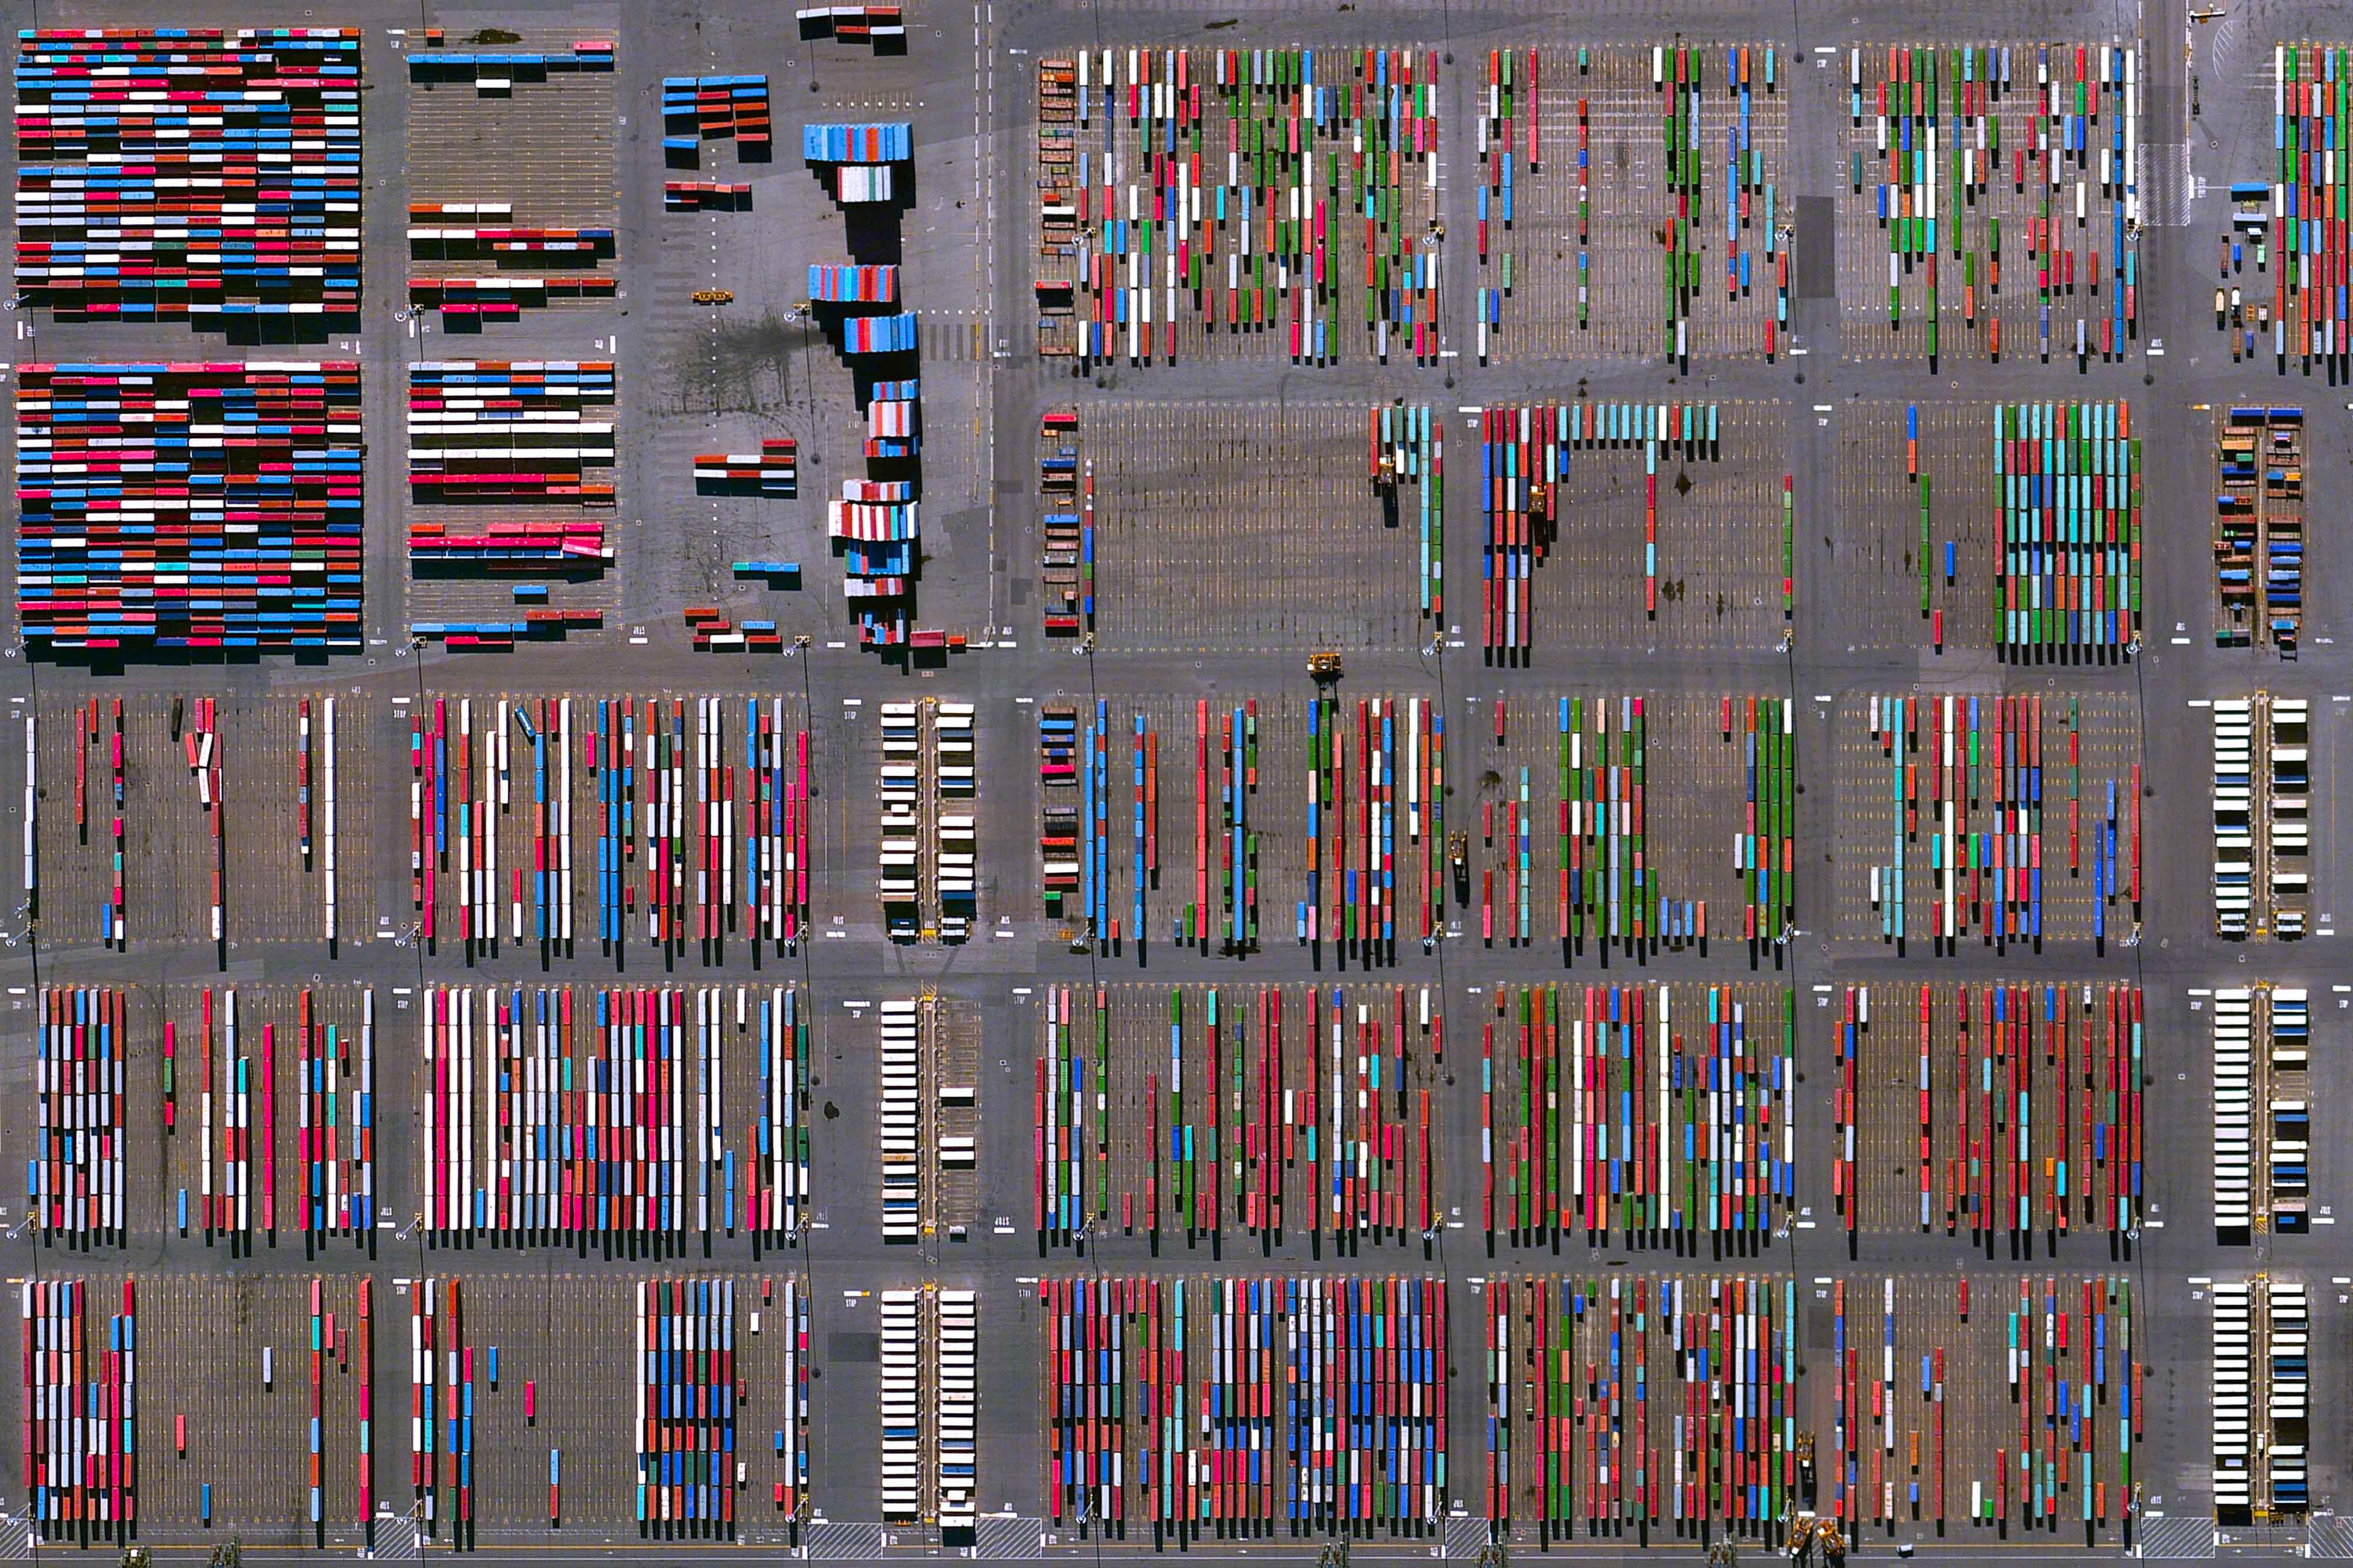 ©PICTURE BY©Daily Overview/DigitalGlobe Inc/IBERPRESS 